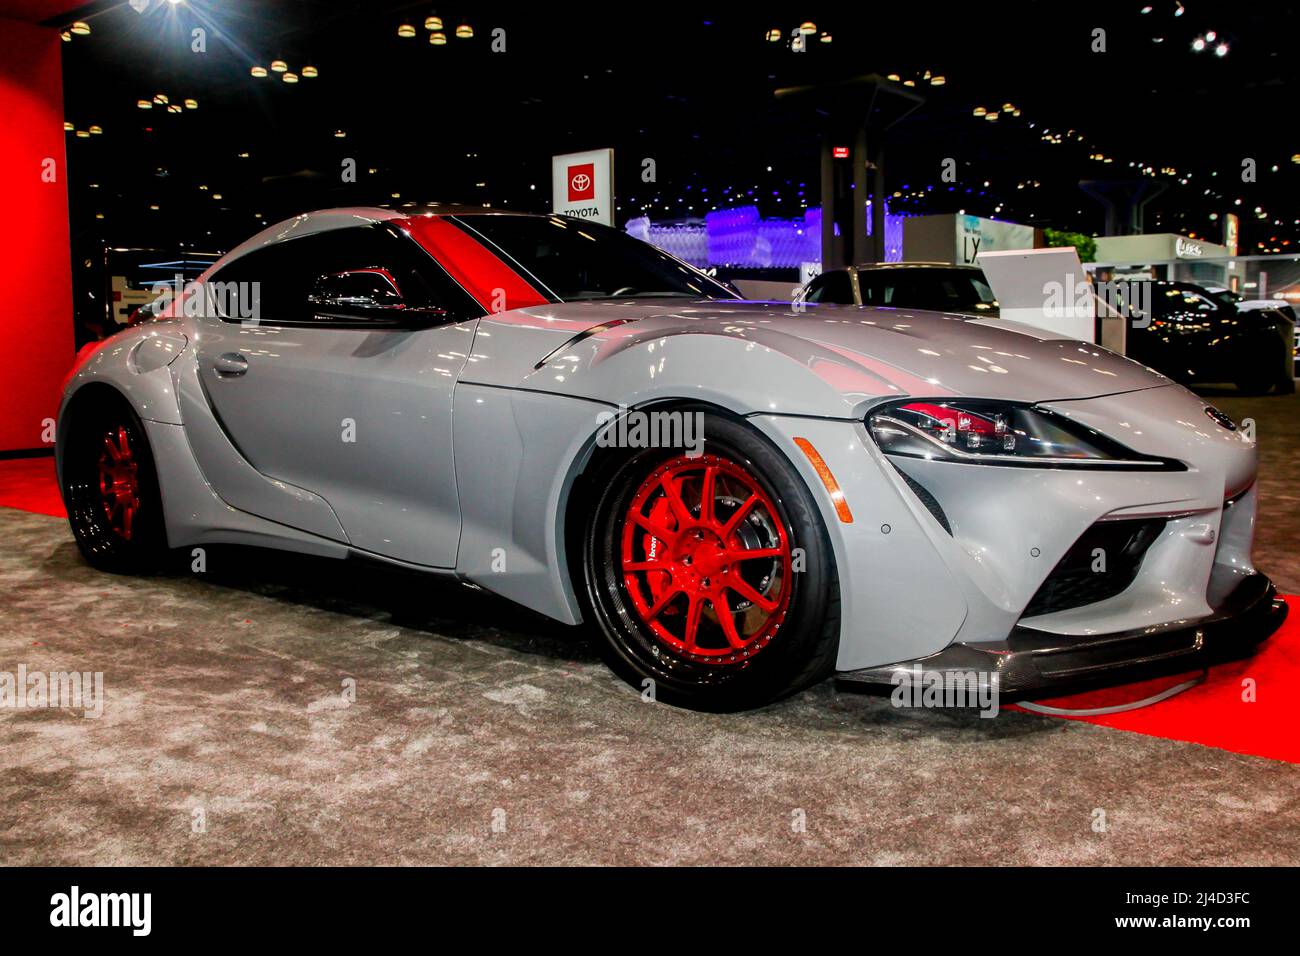 Toyota Supra For Sale In New York, NY - ®